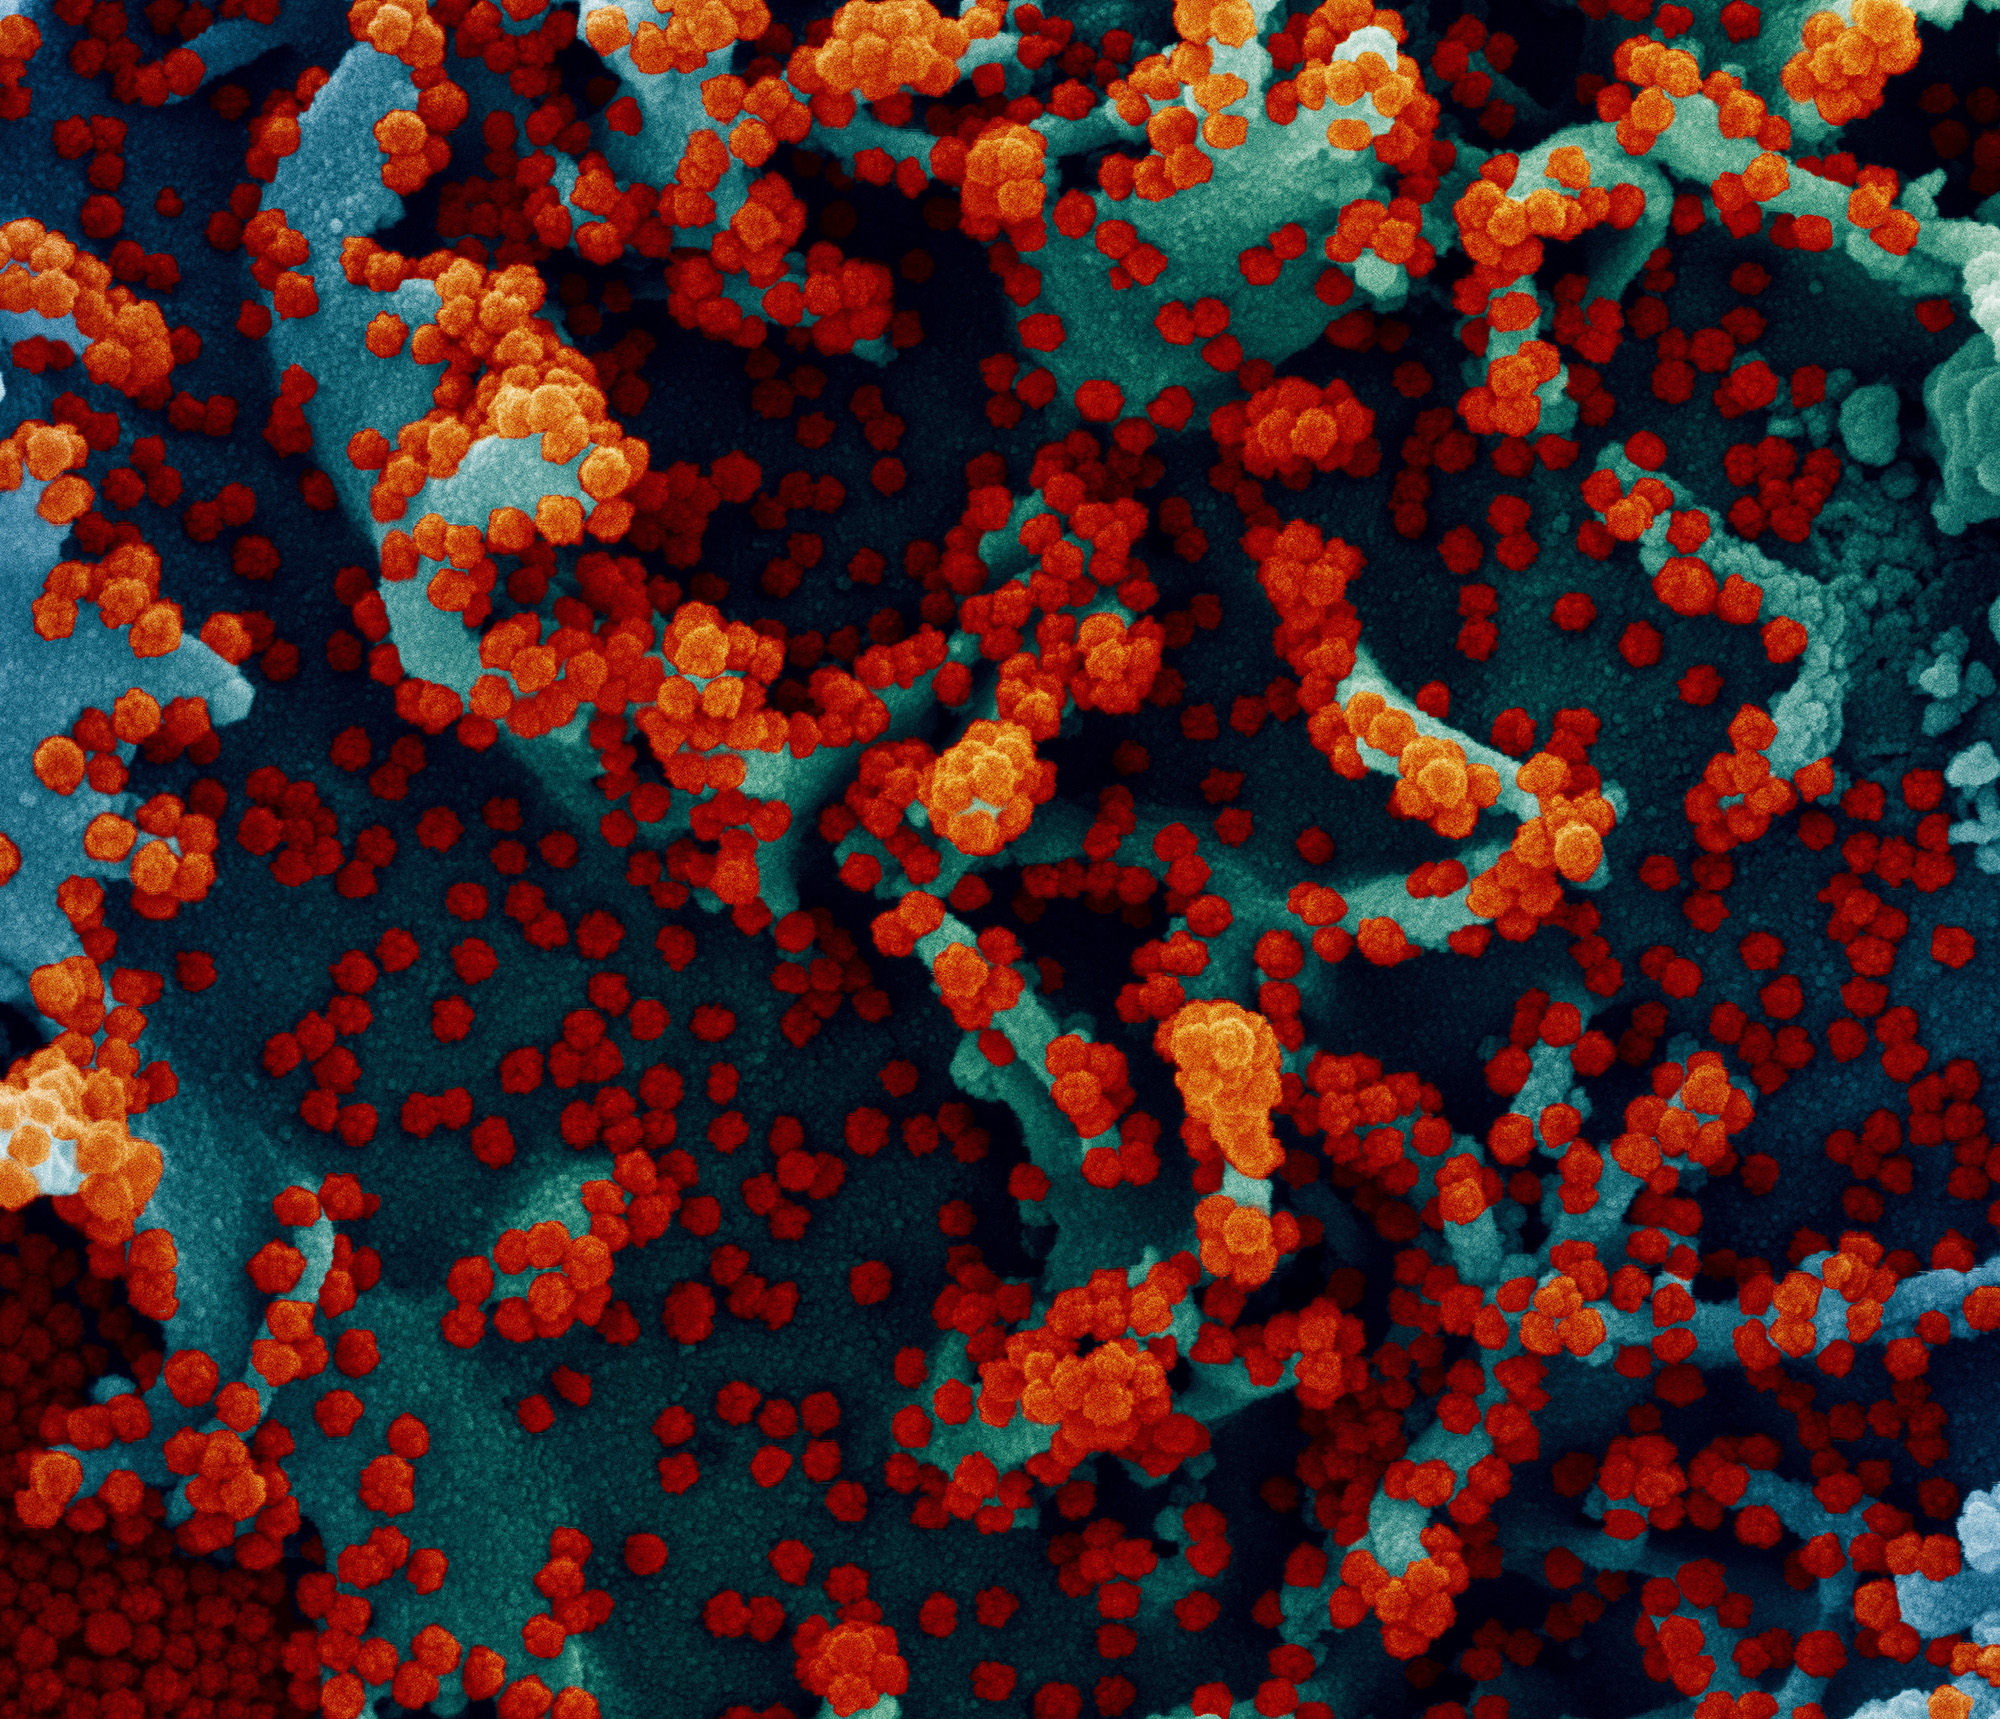 Colorized scanning electron micrograph of a human cell heavily infected with SARS-CoV-2 virus particles (red). 